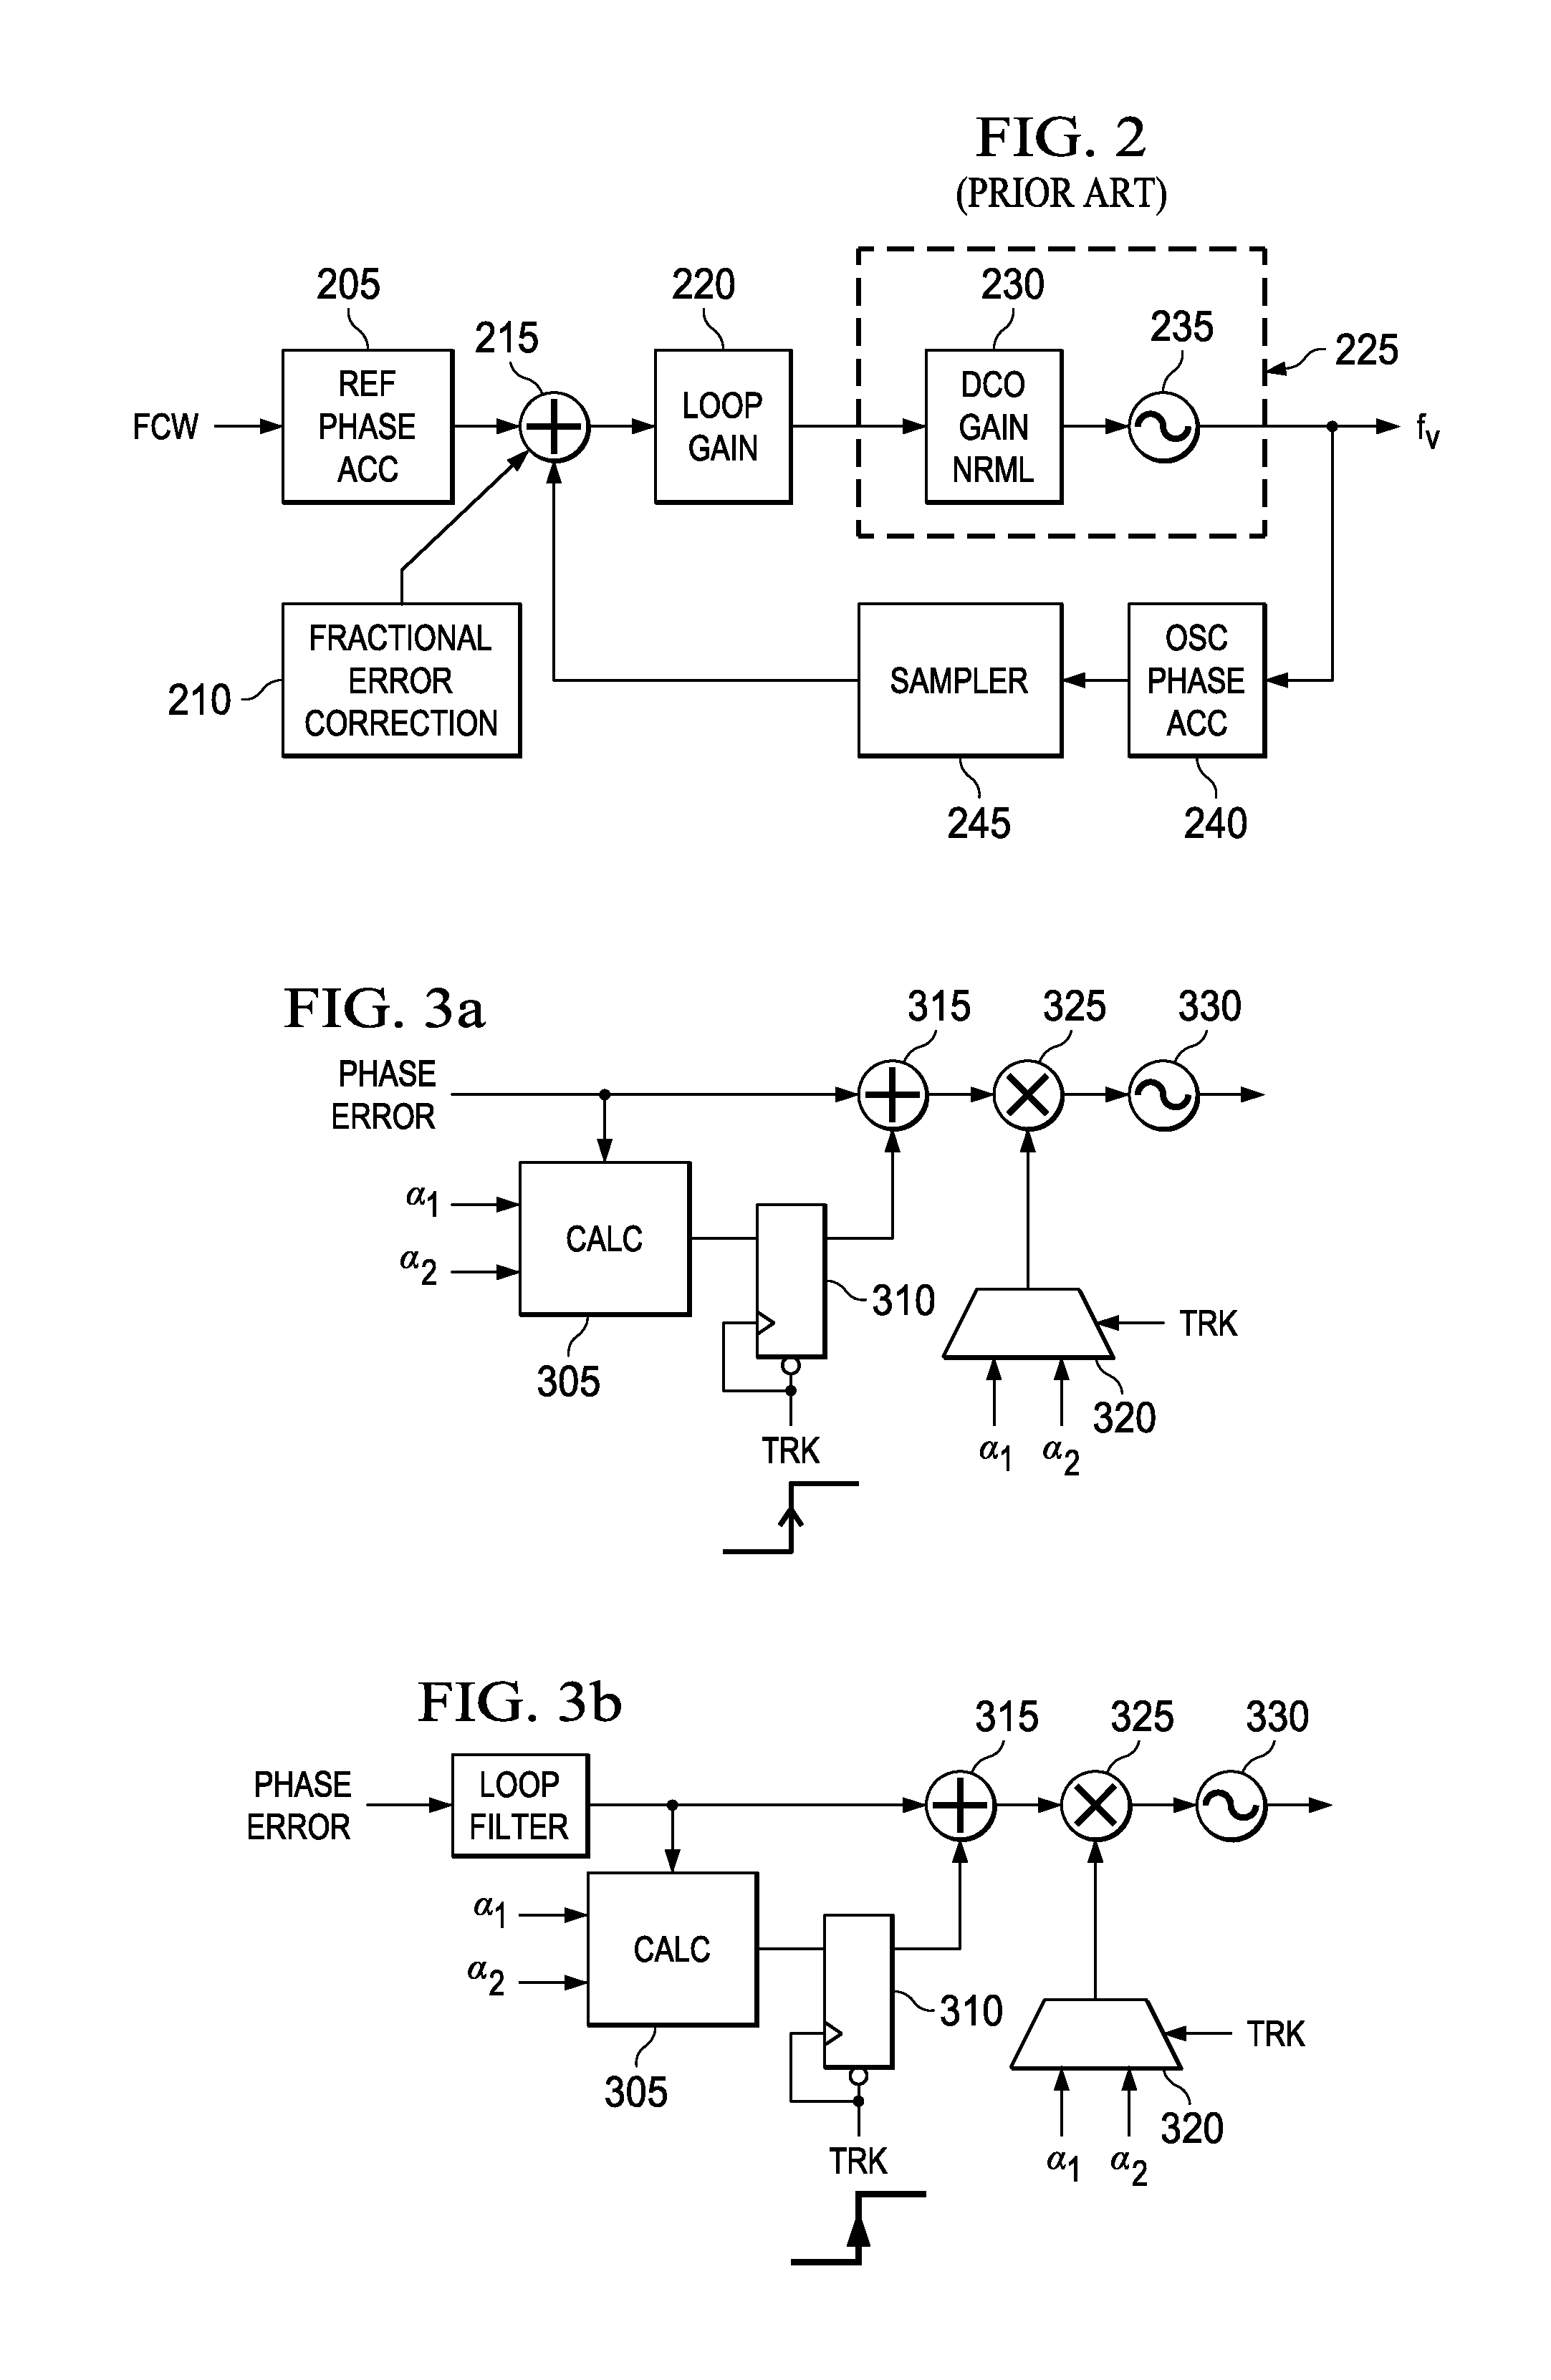 Fine-grained gear-shifting of a digital phase-locked loop (PLL)